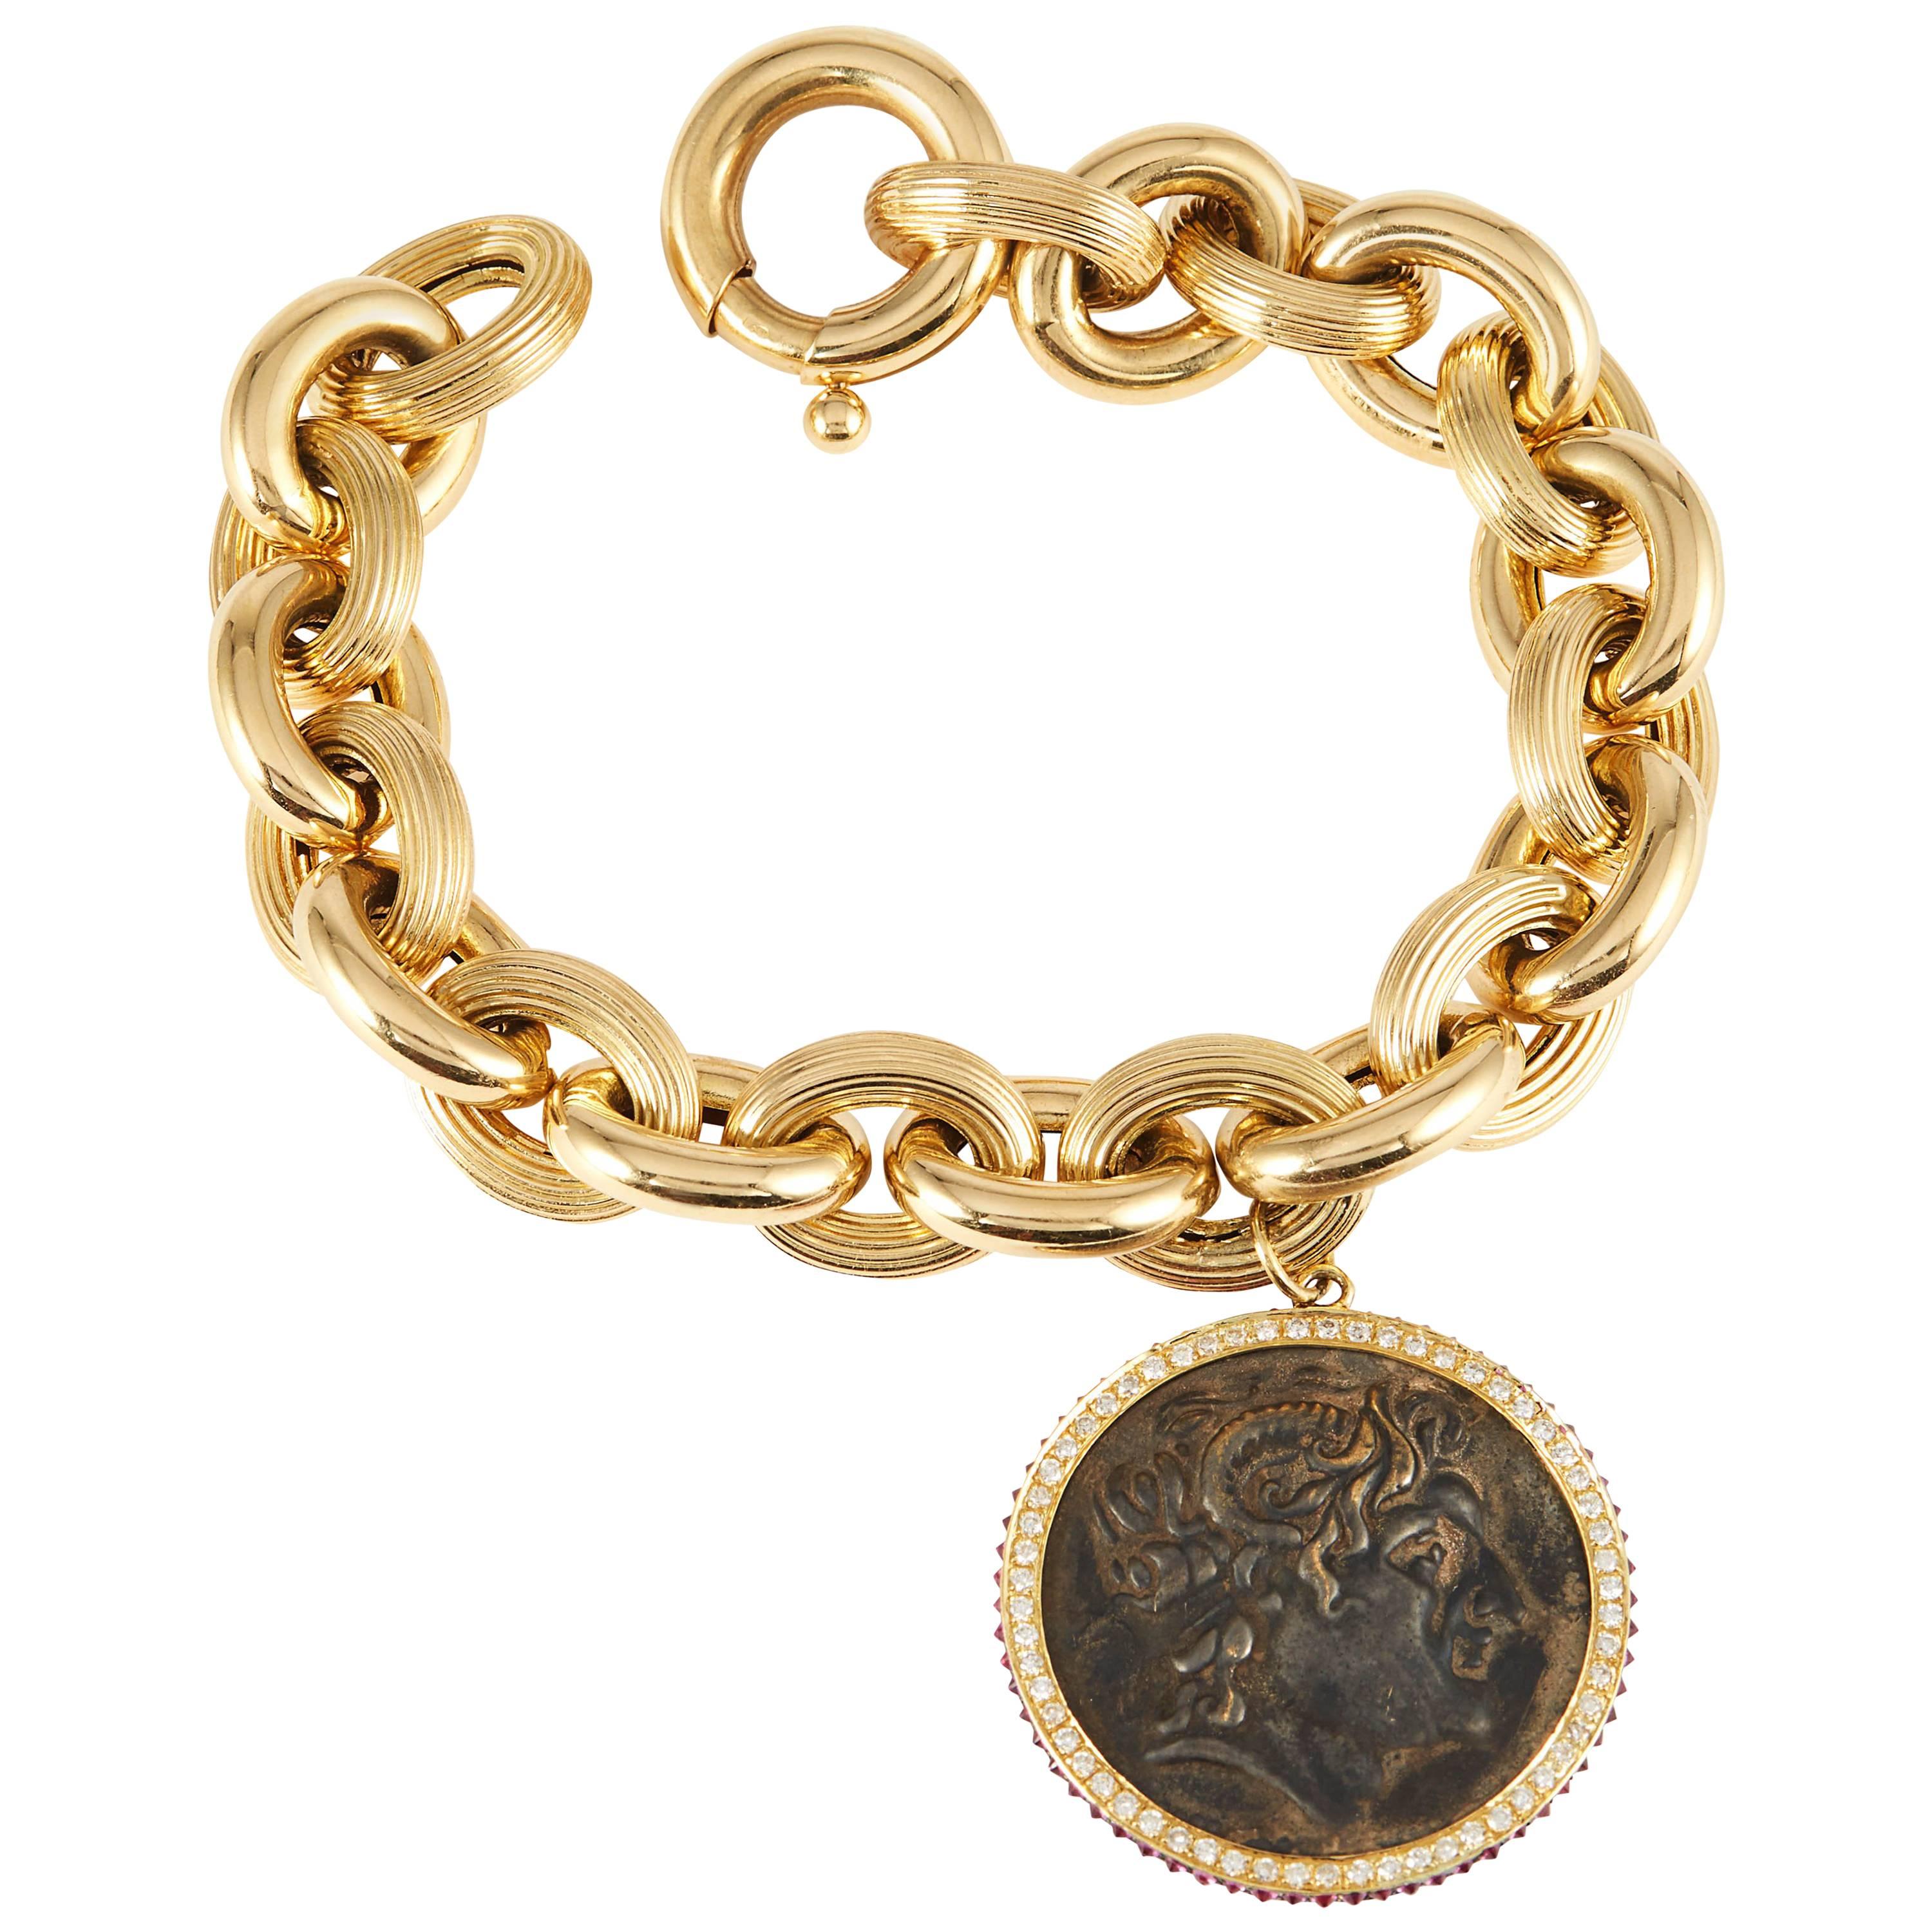 SAM.SAAB Roman Coin Bracelet and Yellow Gold Chain For Sale